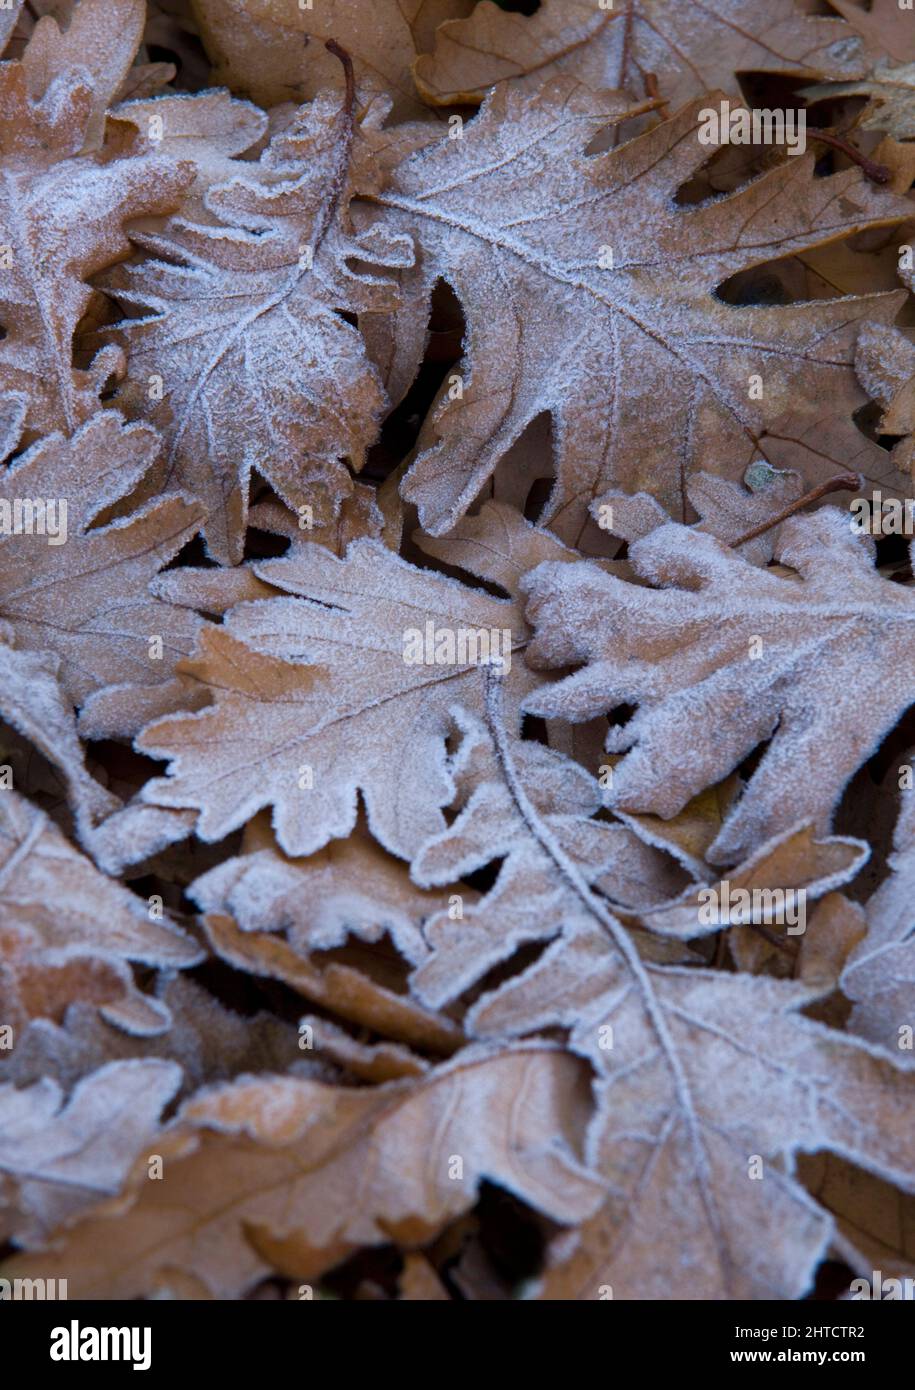 Audley End, Audley Park, Saffron Walden, Uttlesford, Essex, 2008. Detail of frosty leaves on the estate. A version of this digital image edited for publication also exists, as PLB N080968.tif. Stock Photo